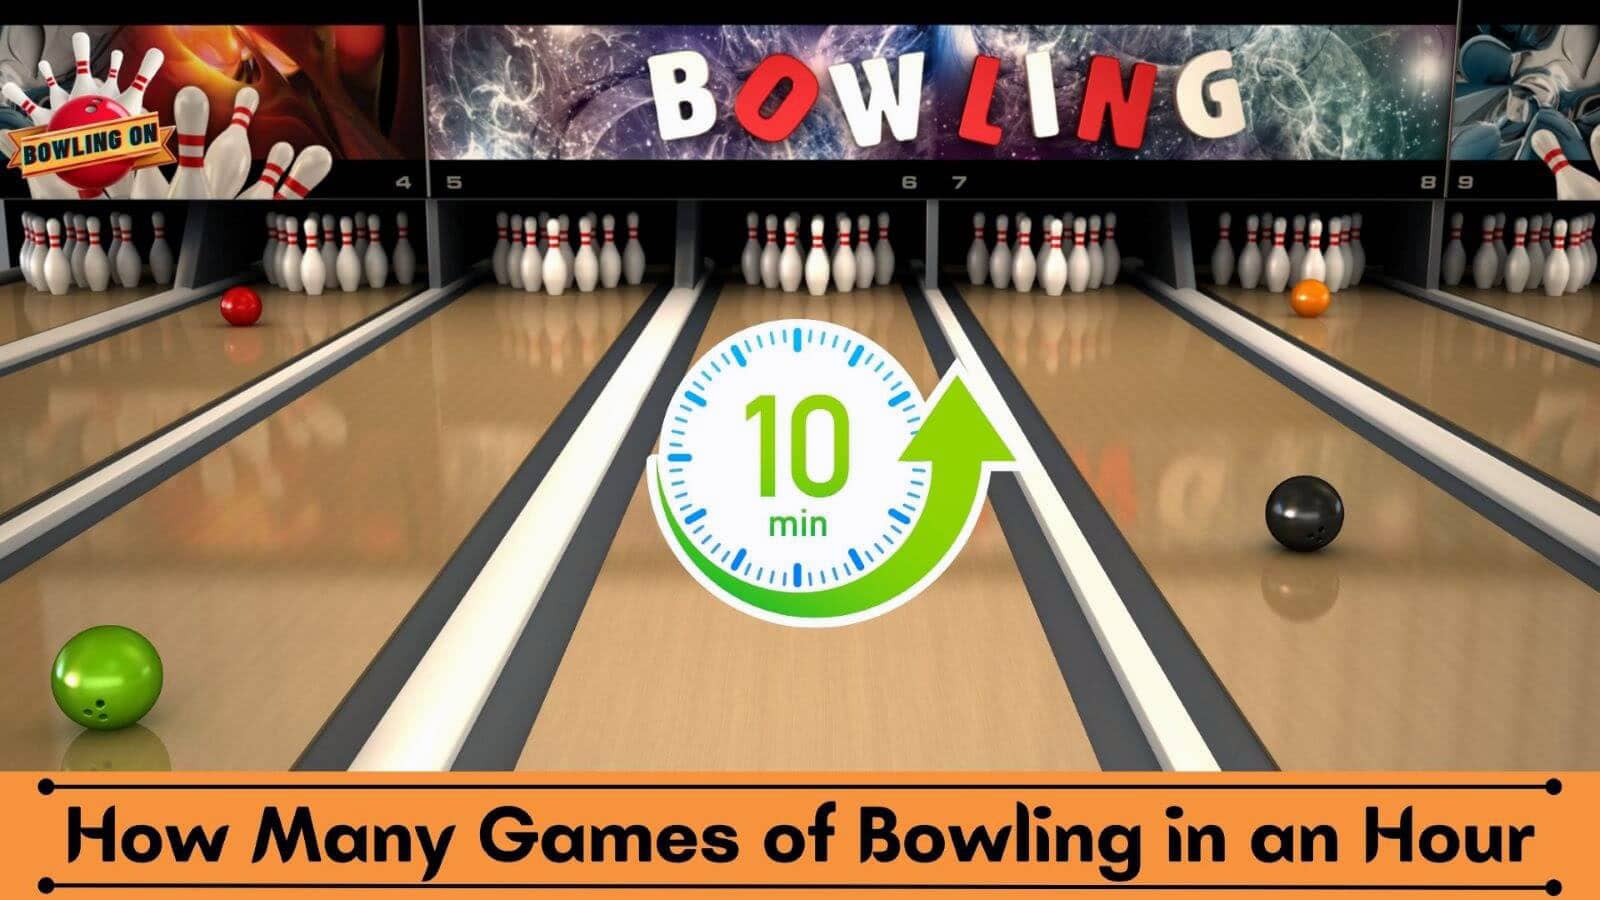 How Many Games of Bowling in an Hour?